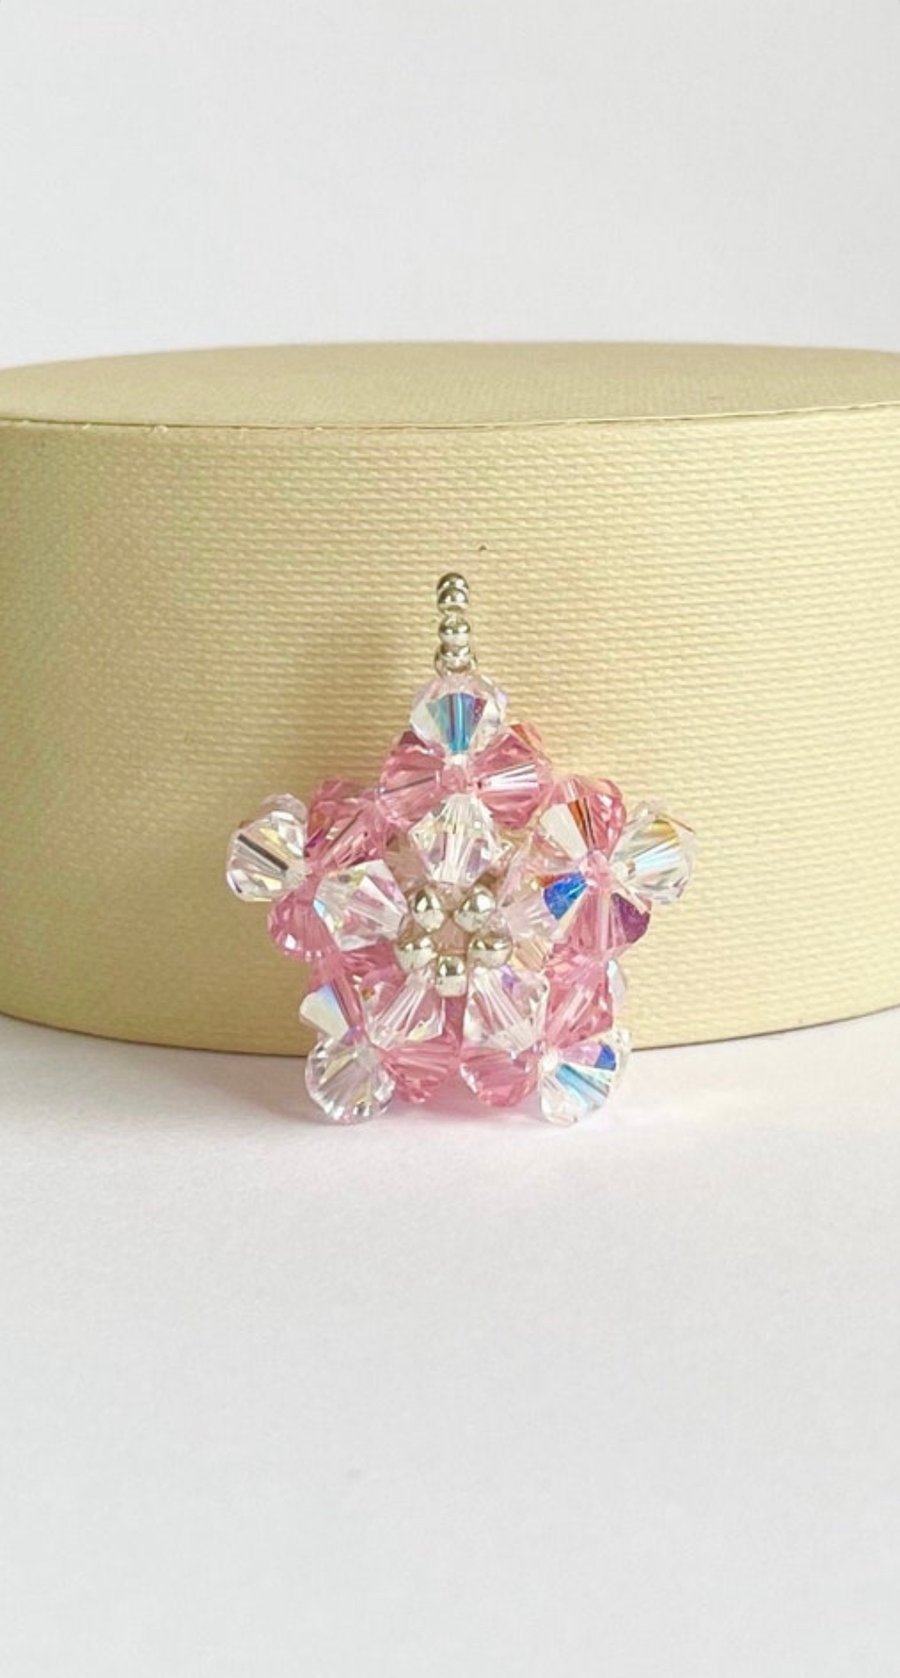 Handbag Charm, Rose Pink Crystal Star, with a Chainmaille Chain and Keyring